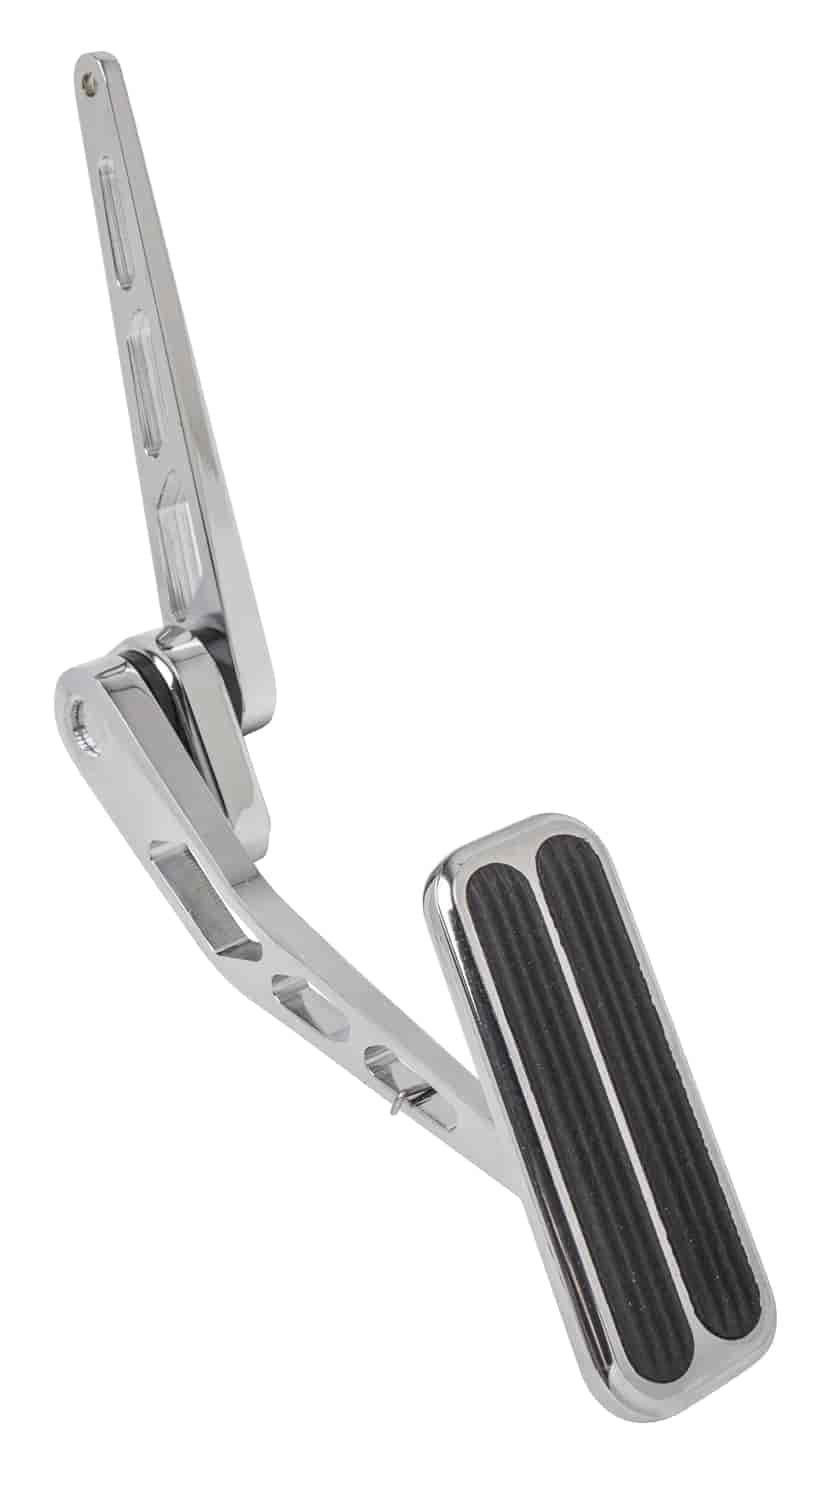 BILLET ALUMINUM THROTTLE PEDAL PAD WITH RUBBER INSERTS - CHROME FINISHED